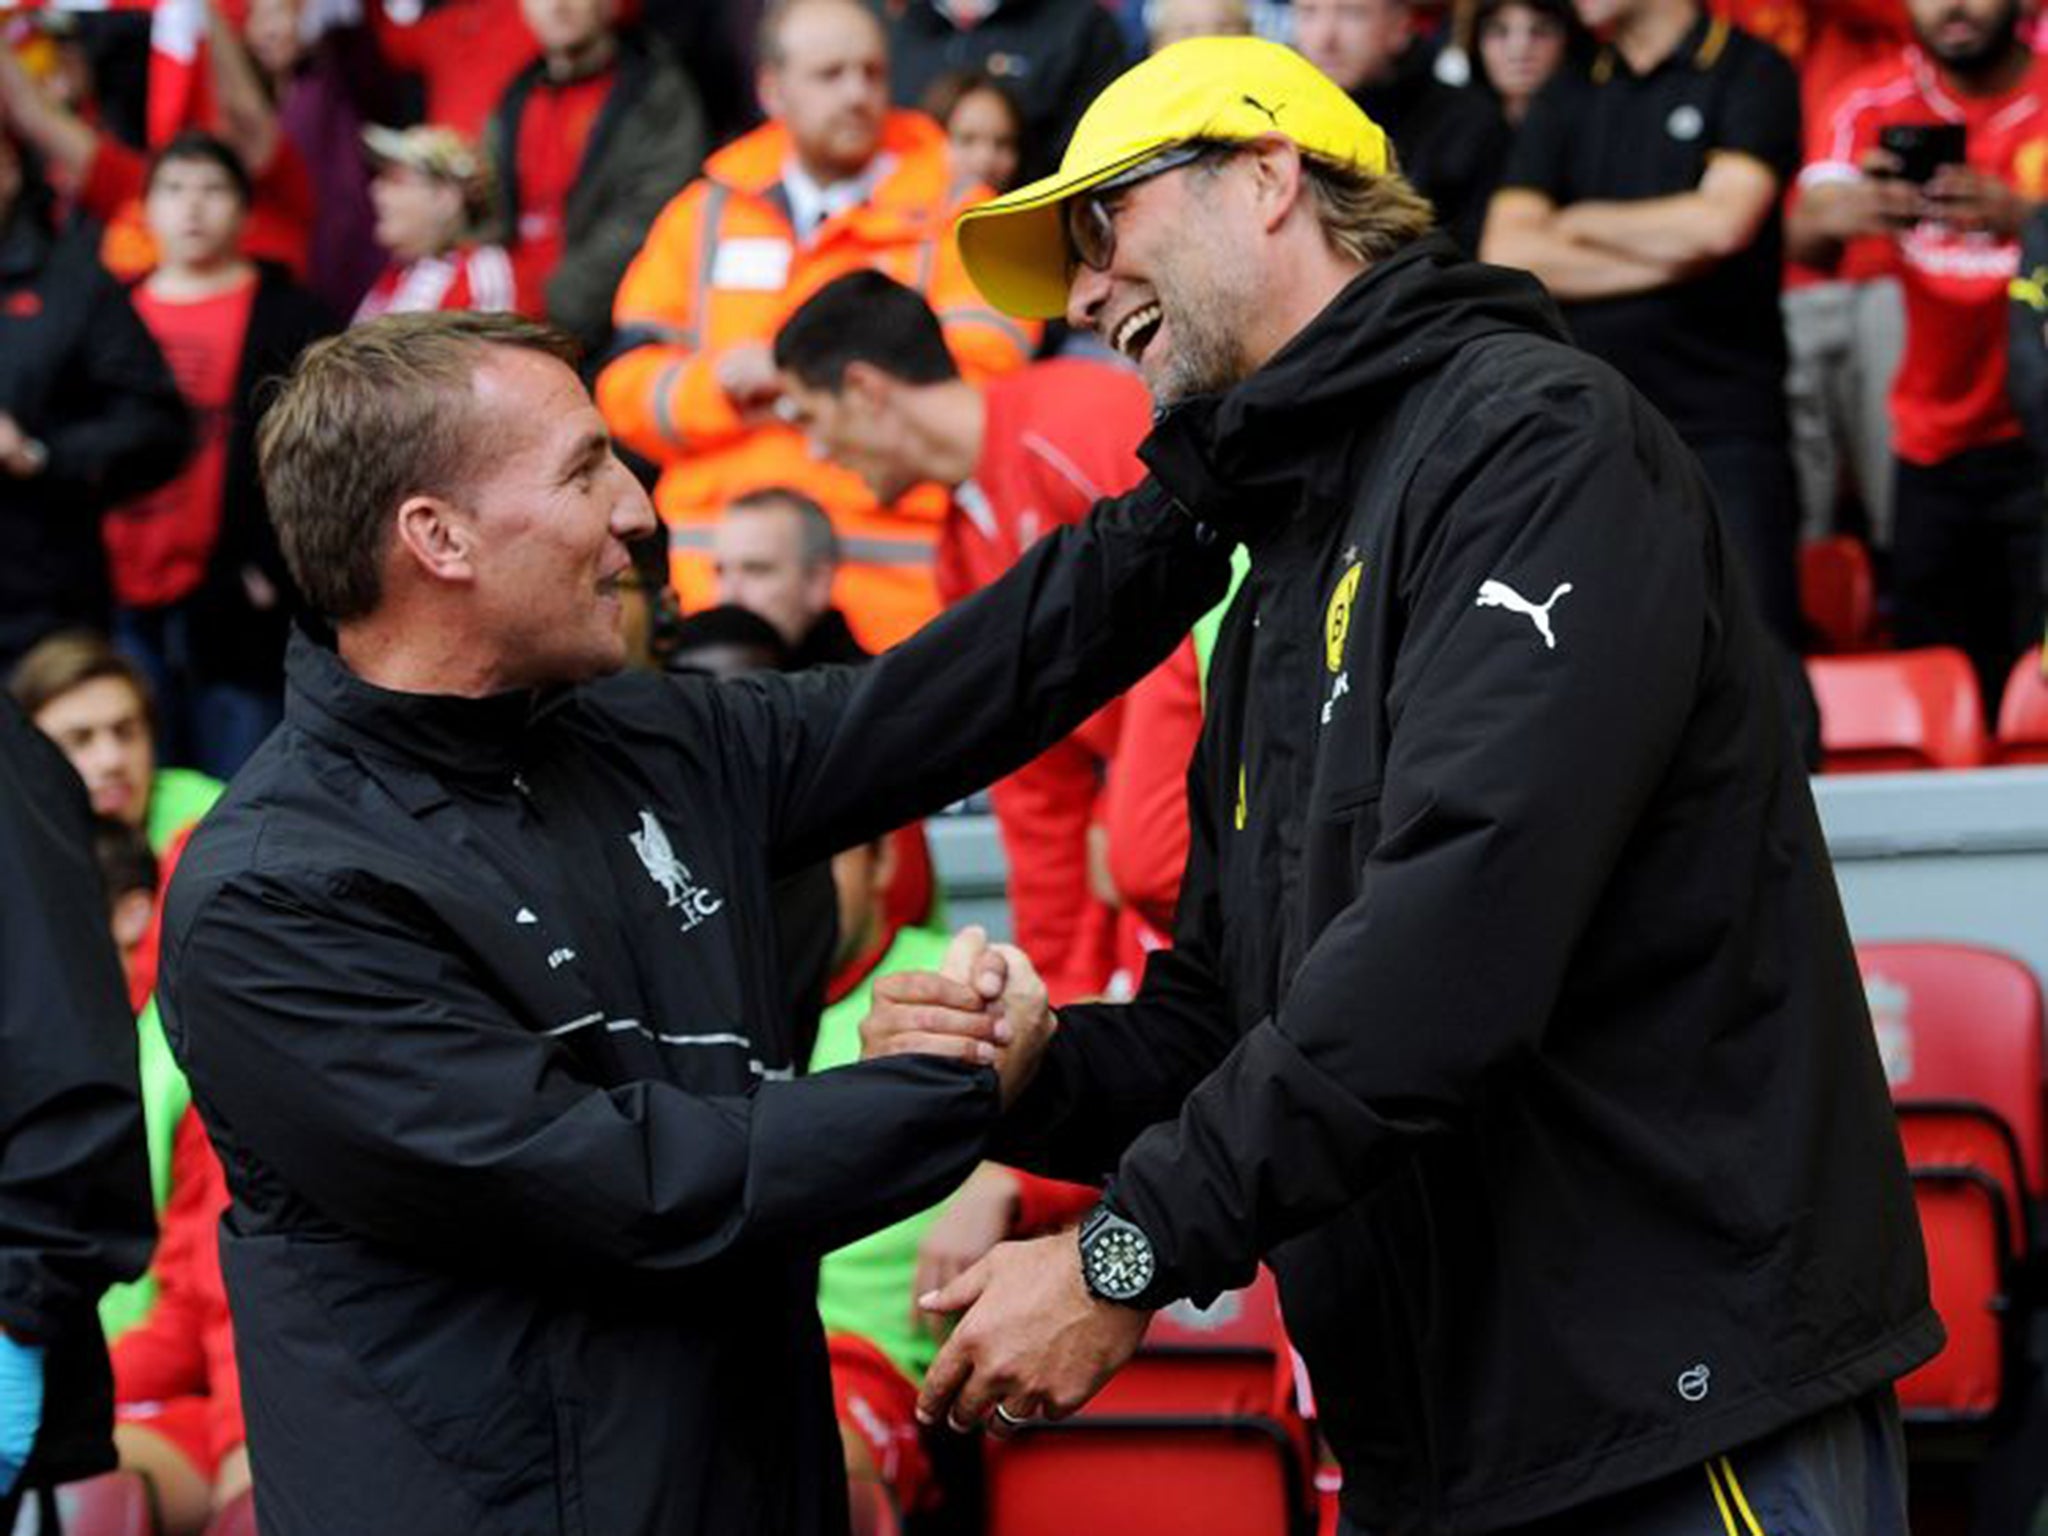 Brendan Rodgers, left, shakes hands with Jürgen Klopp before a friendly between Liverpool and Borussia Dortmund at Anfield last year